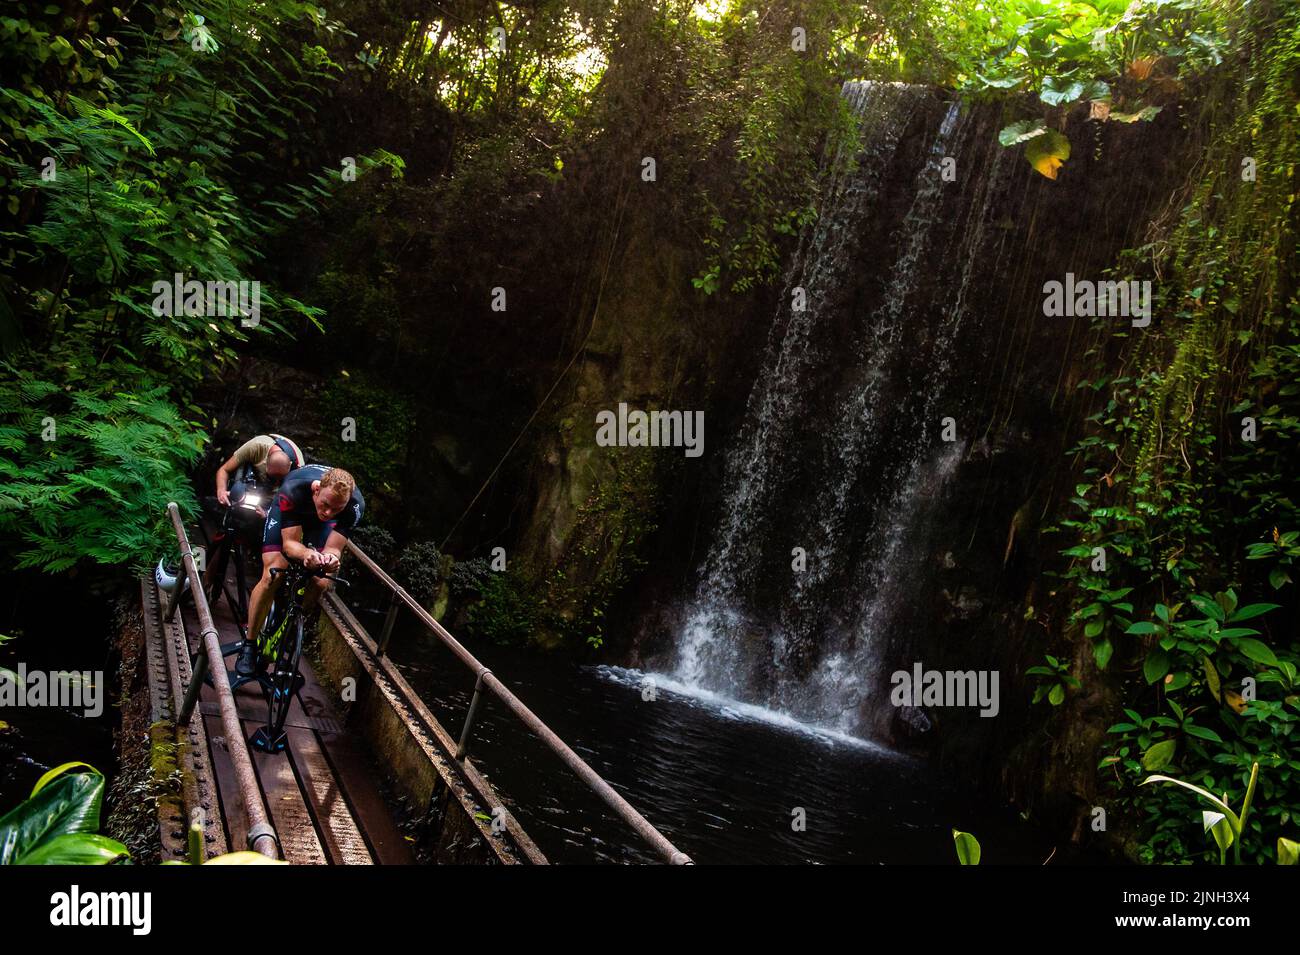 A cameraman seen shooting during the training of athlete Olaf Van Den Bergh in front of a waterfall. Dutch top athlete Olaf Van Den Bergh starts training in the indoor tropical rainforest of the Burgers' Zoo in Arnhem, in preparation for the Ironman World Championships in Kailua-Kona located in Hawaii. The Bush (indoor tropical rainforest) is the ideal training location because of the high humidity and temperature. (Photo by Ana Fernandez / SOPA Images/Sipa USA) Stock Photo